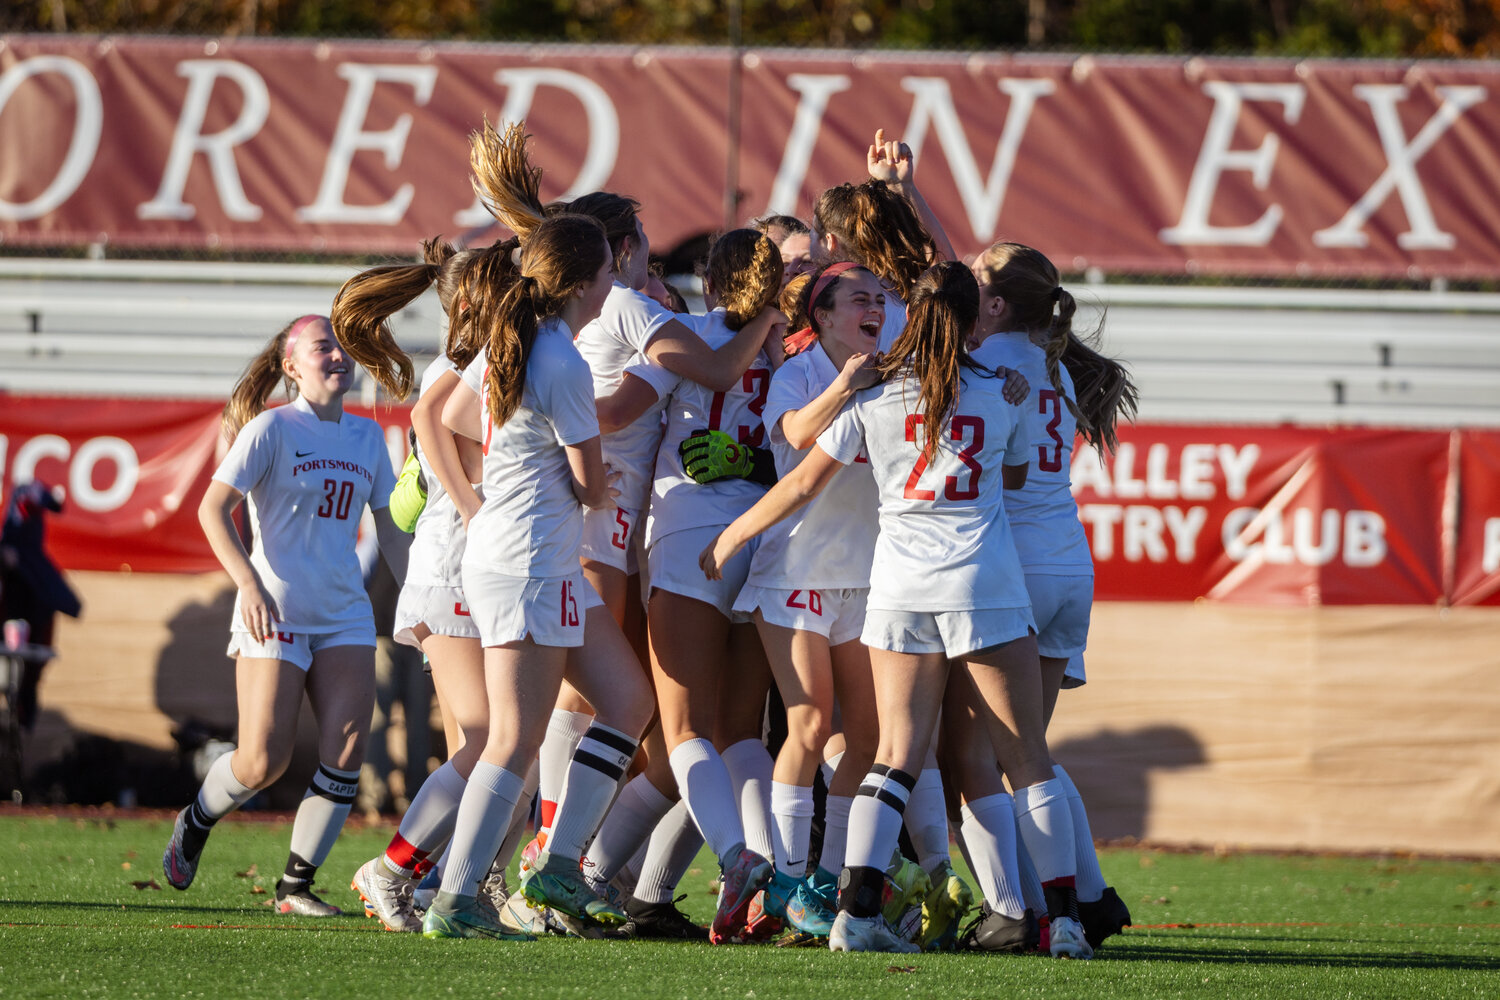 Members of the Portsmouth High girls’ varsity soccer team mob one another after winning the Division II state title at Rhode Island College on Saturday. Abby Costa, who scored two of the Patriots’ five goals, is at right, giving hugs to Sophia Karousos (23) and Emma Norton (3).